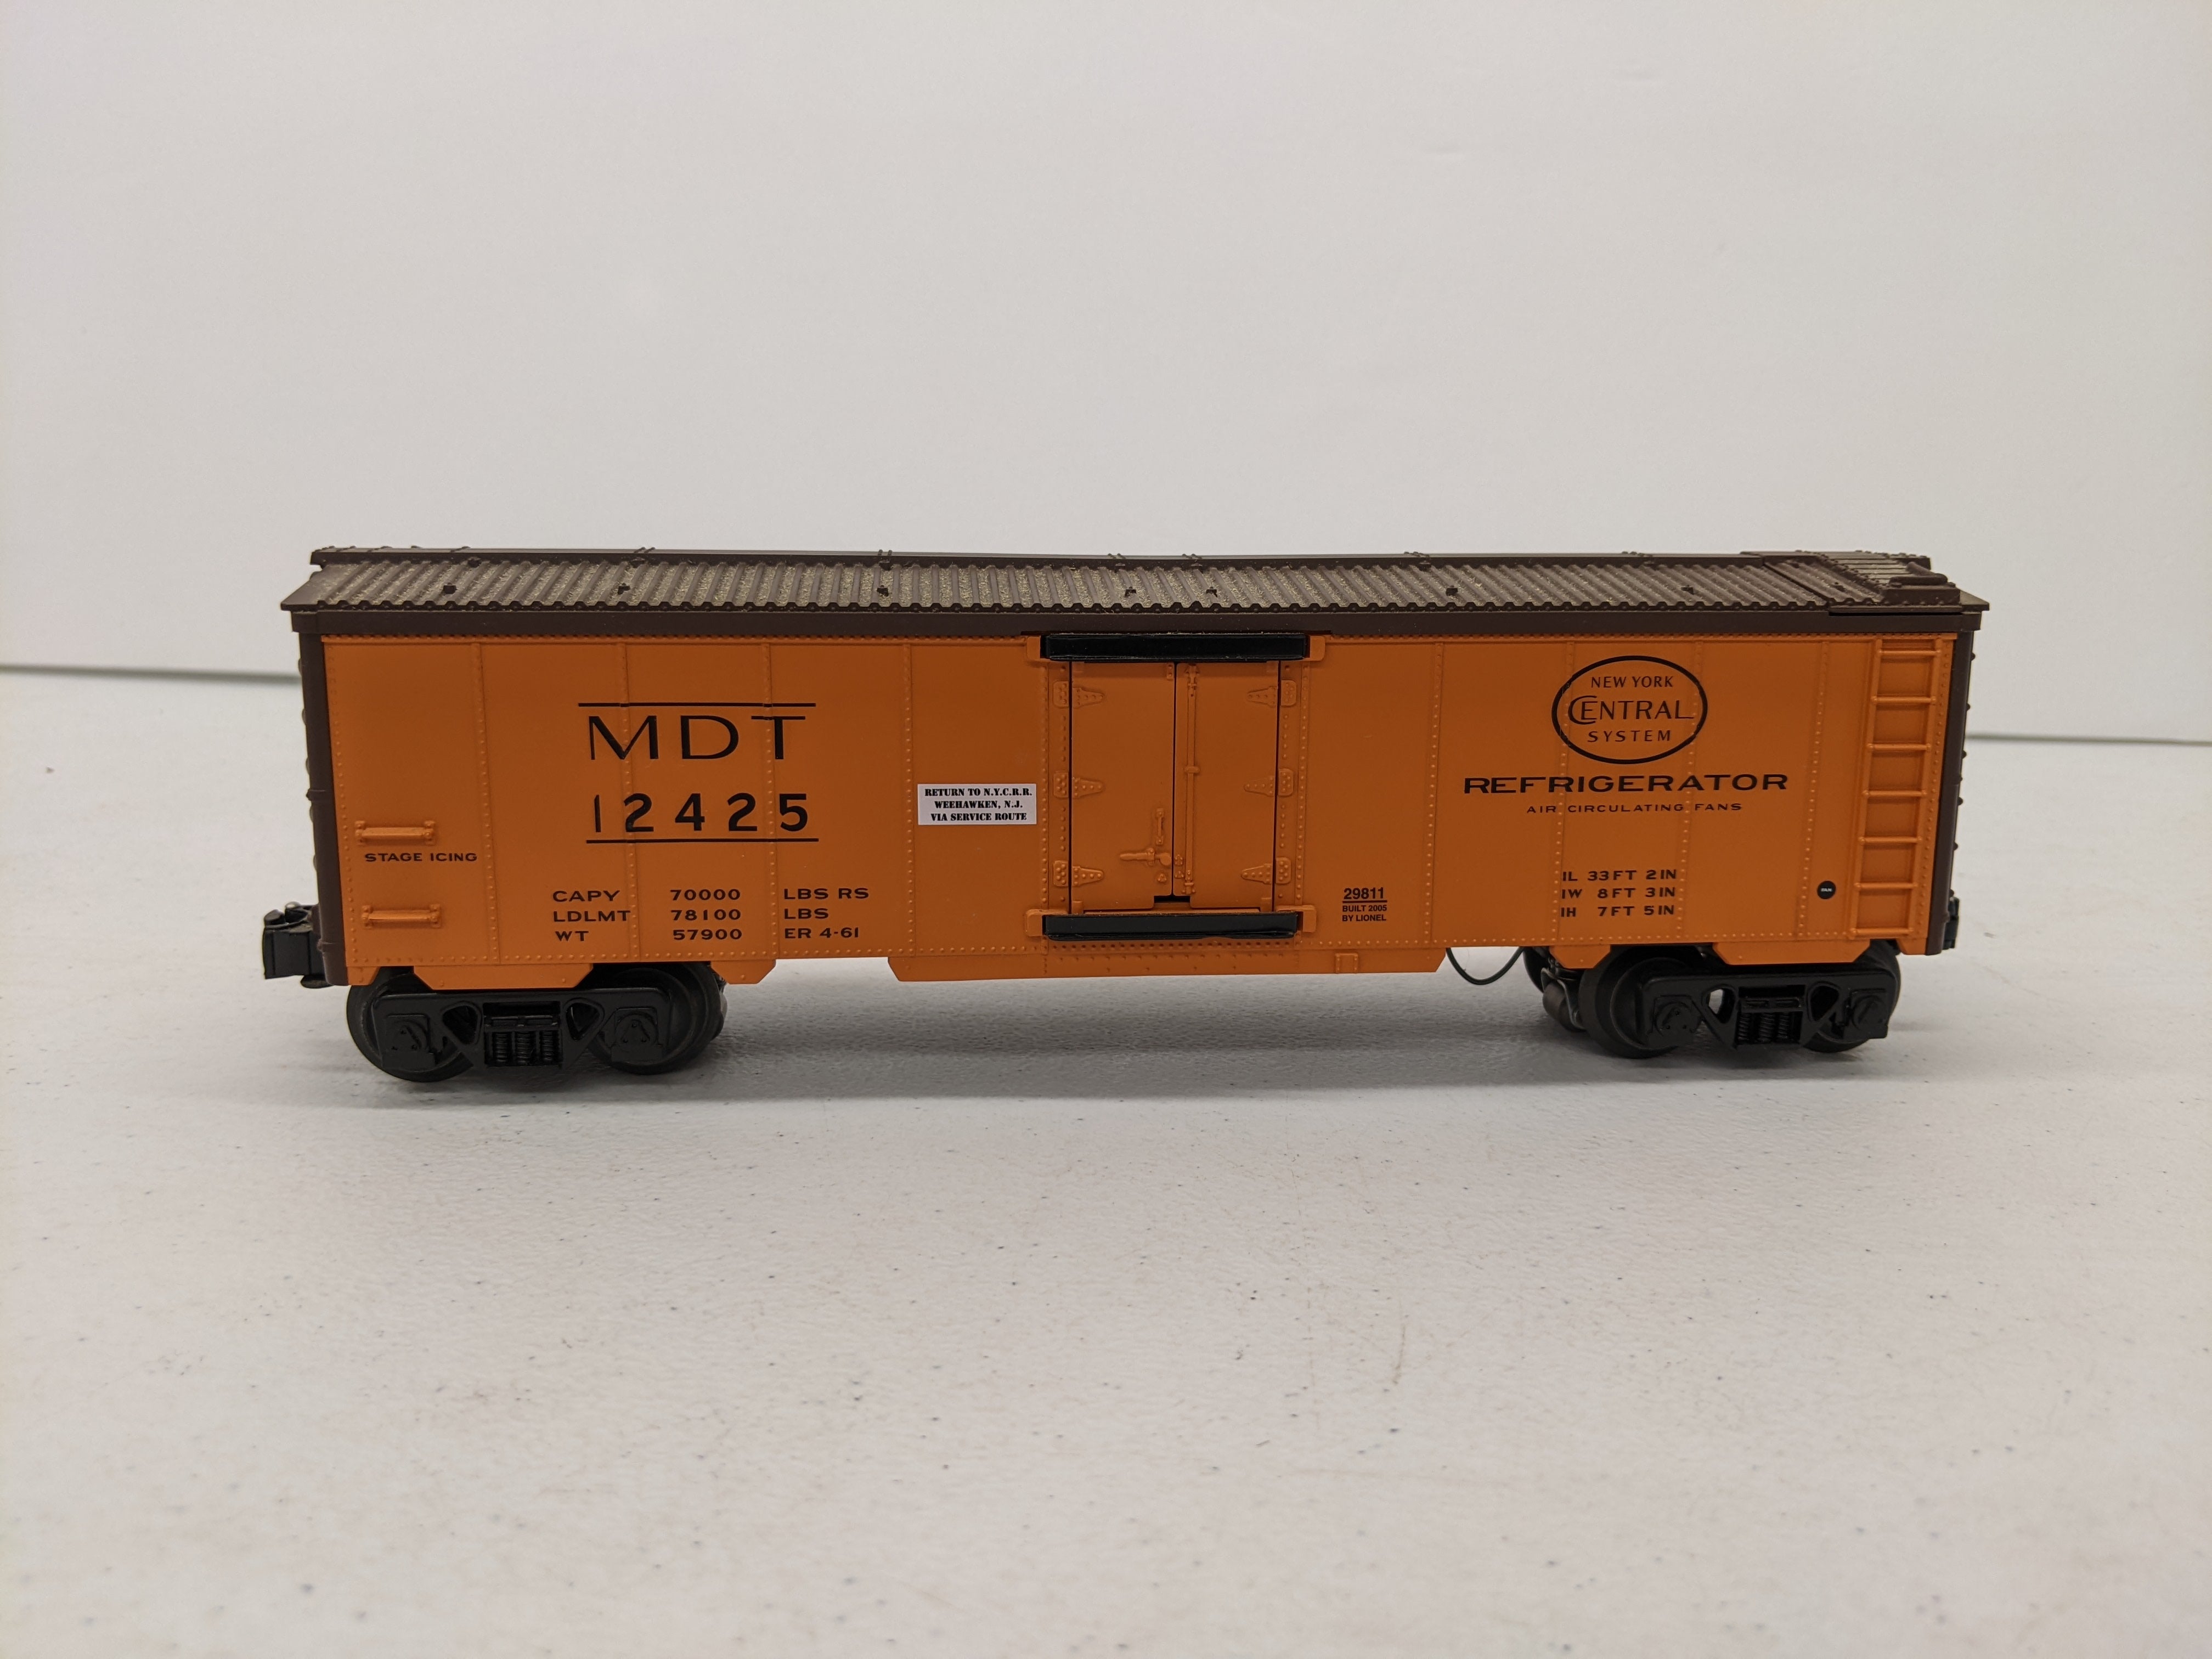 USED Lionel 6-29811 O Scale, Merchant's Despatch Transit Hot Box Reefer, New York Central MDT #12425, w/ Lights, Smoke +